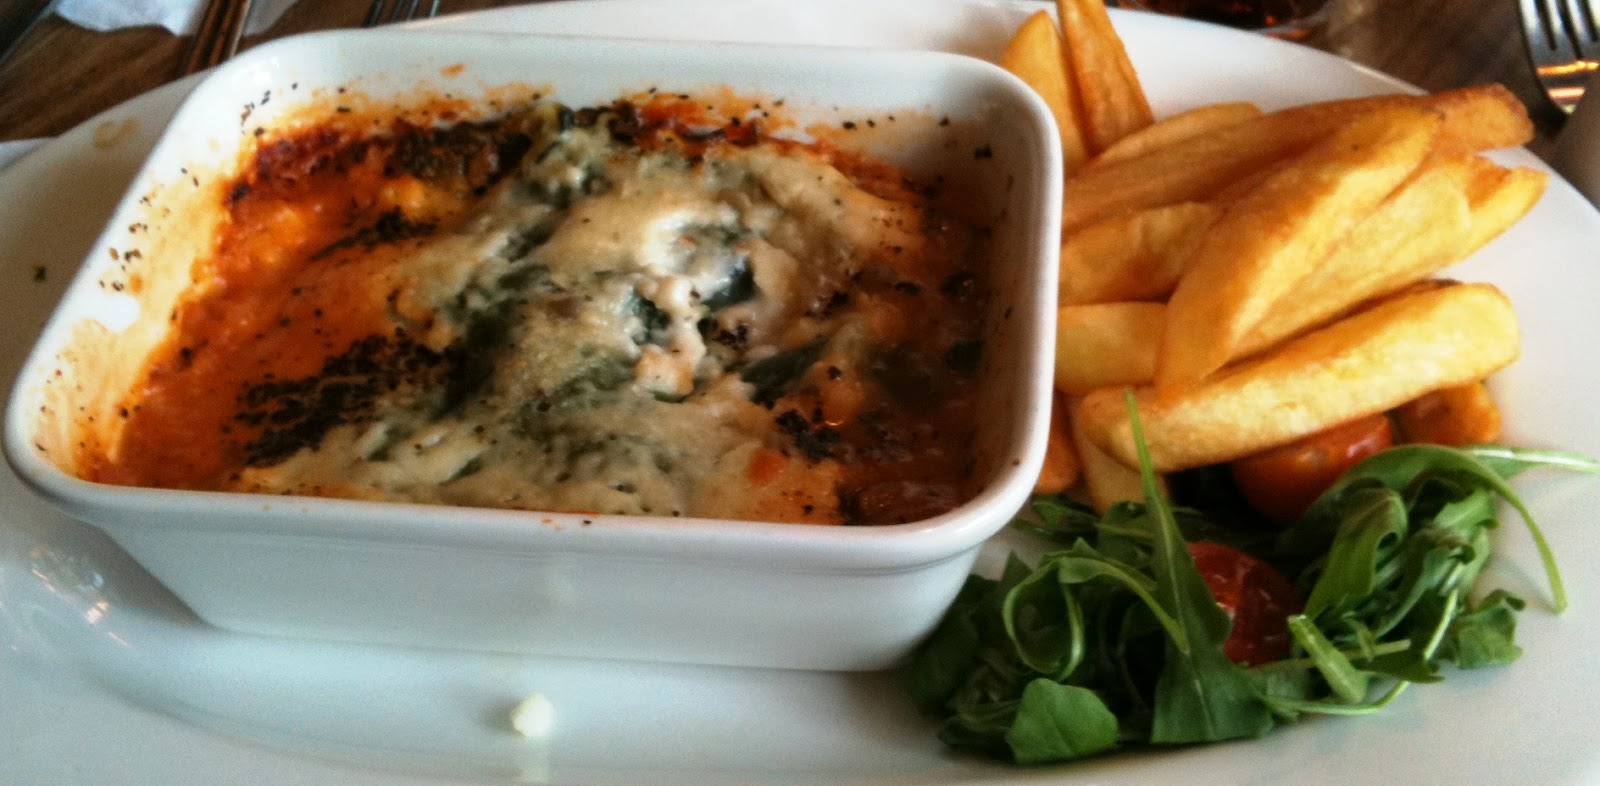 The Vegetarian Experience: Restaurant Review - The Battle Axes, Elstree